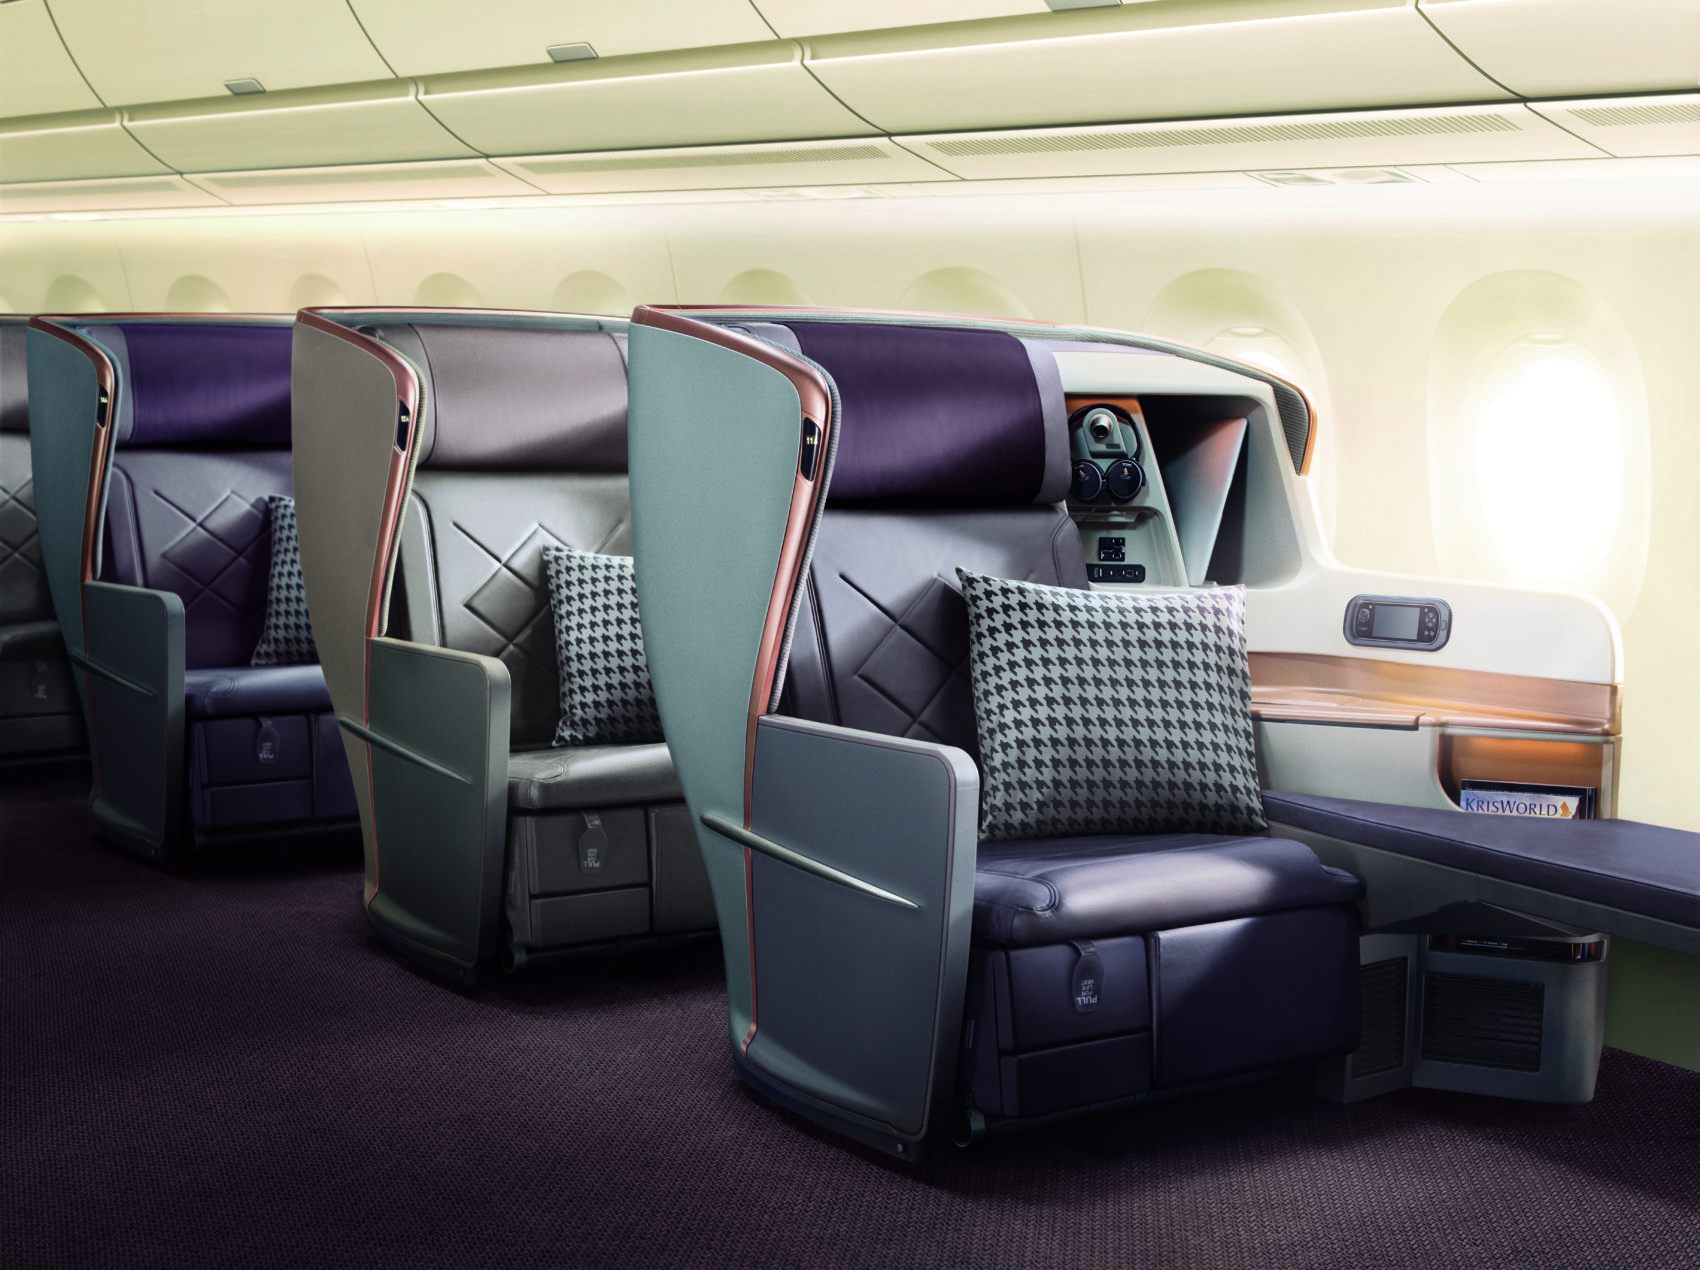 Sinagpore Airlines A350-900 business class